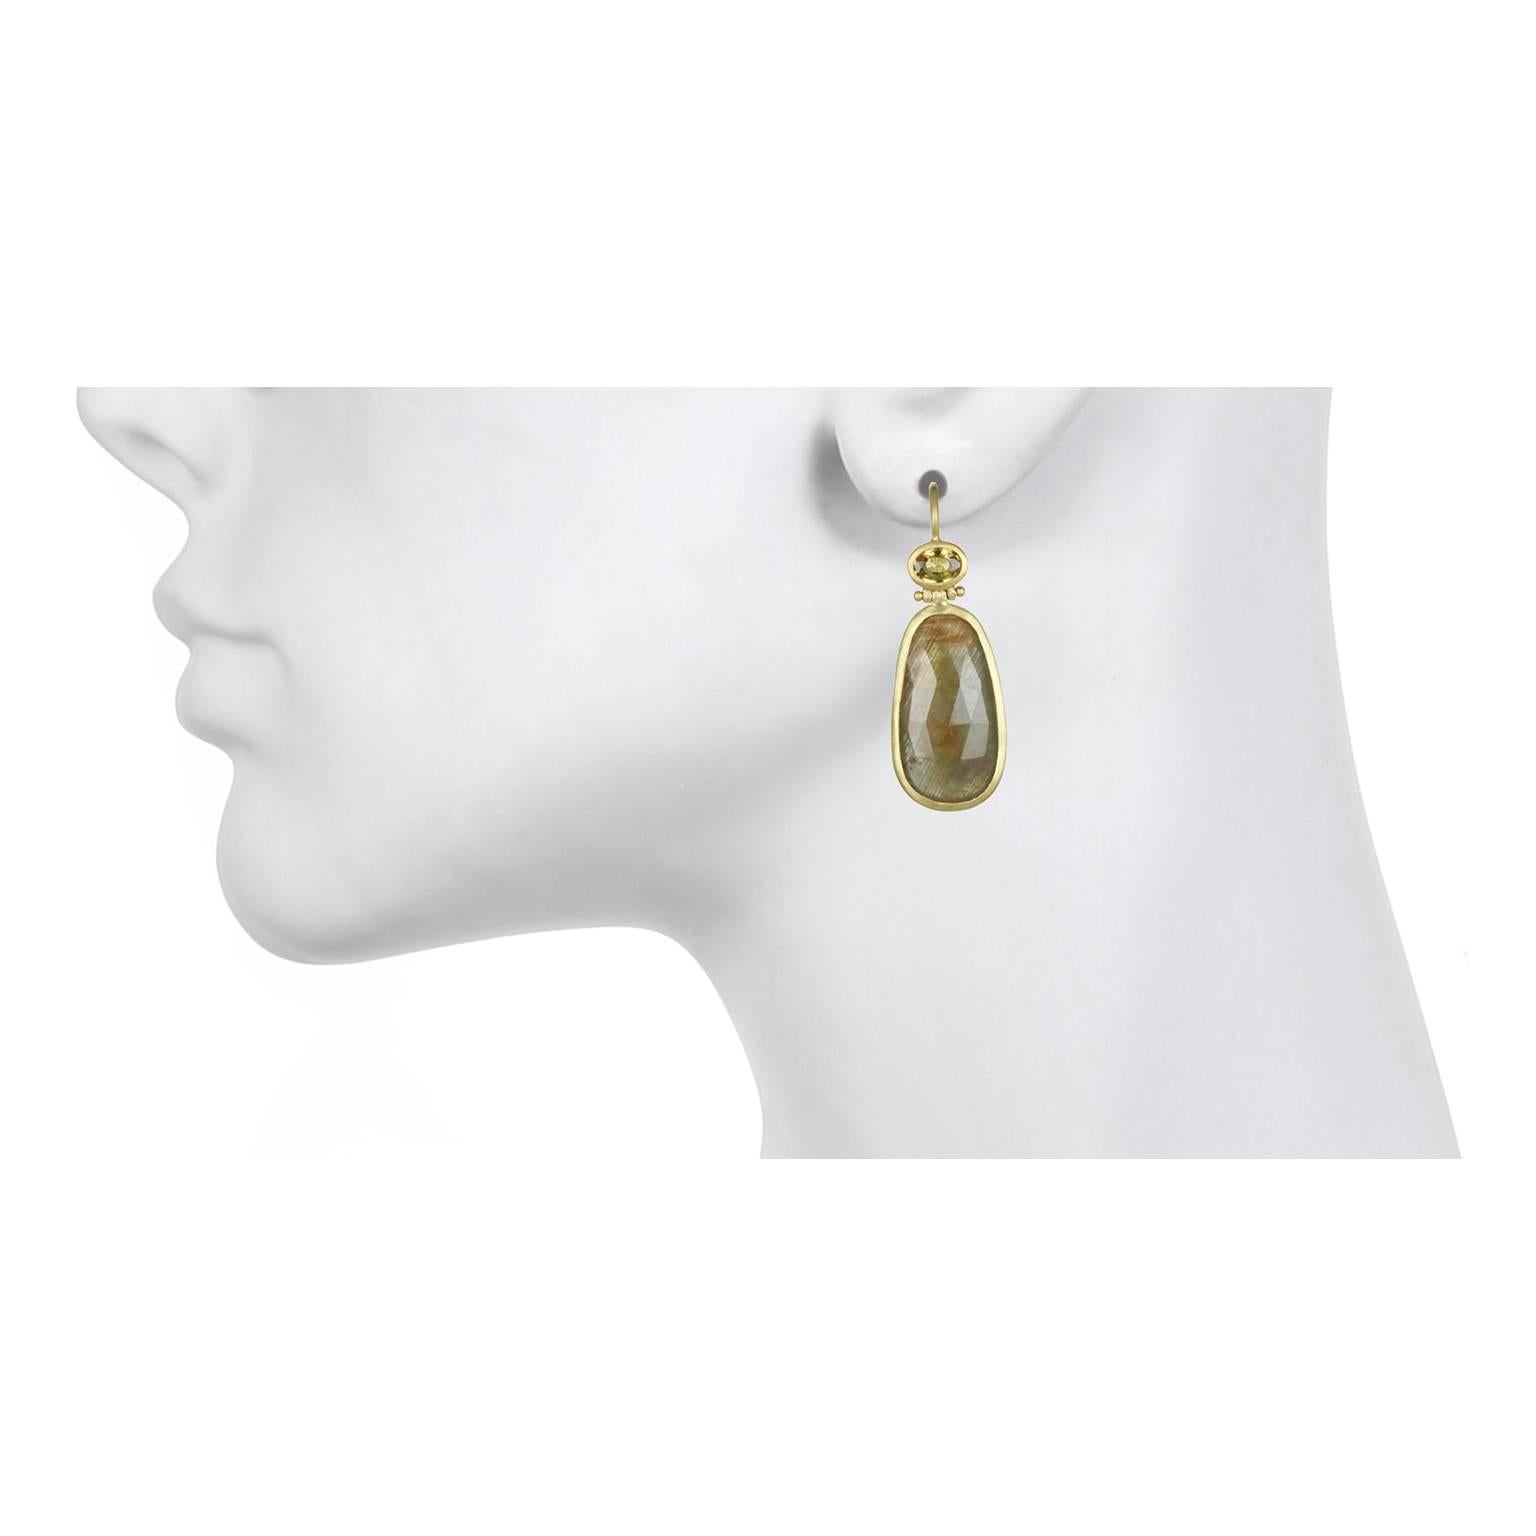 A striking and warm color combination is what makes these sapphire earrings unique.  They feature lightweight, faceted sapphires which give them a big impact but keeps them wearable from day to evening.   Handcrafted in 18k green* gold, rose cut